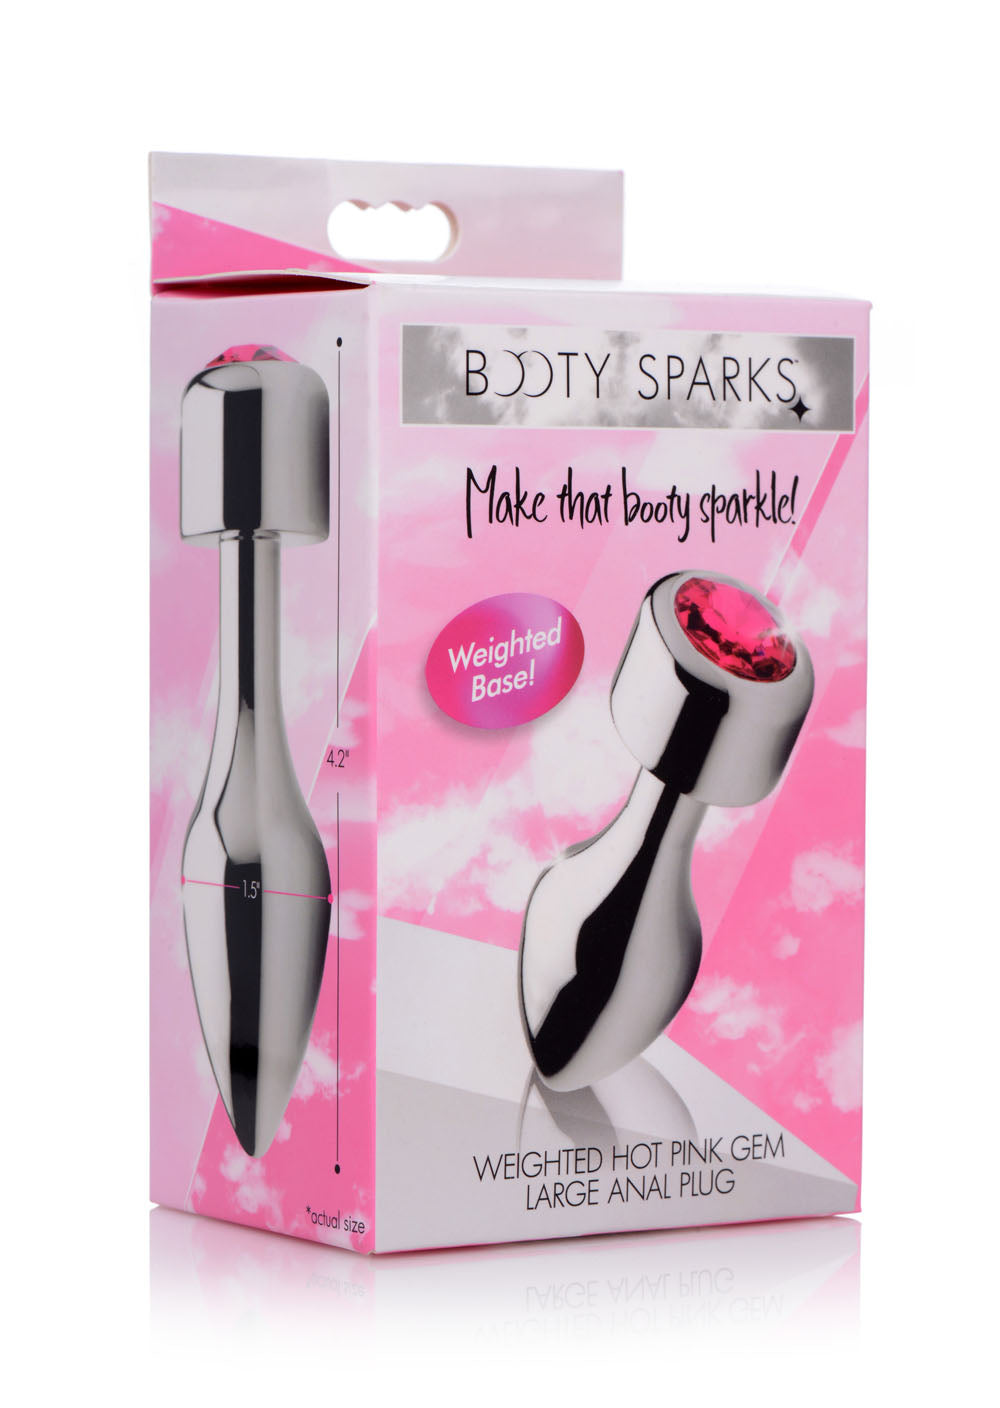 Booty Sparks Weighted Anal Plug